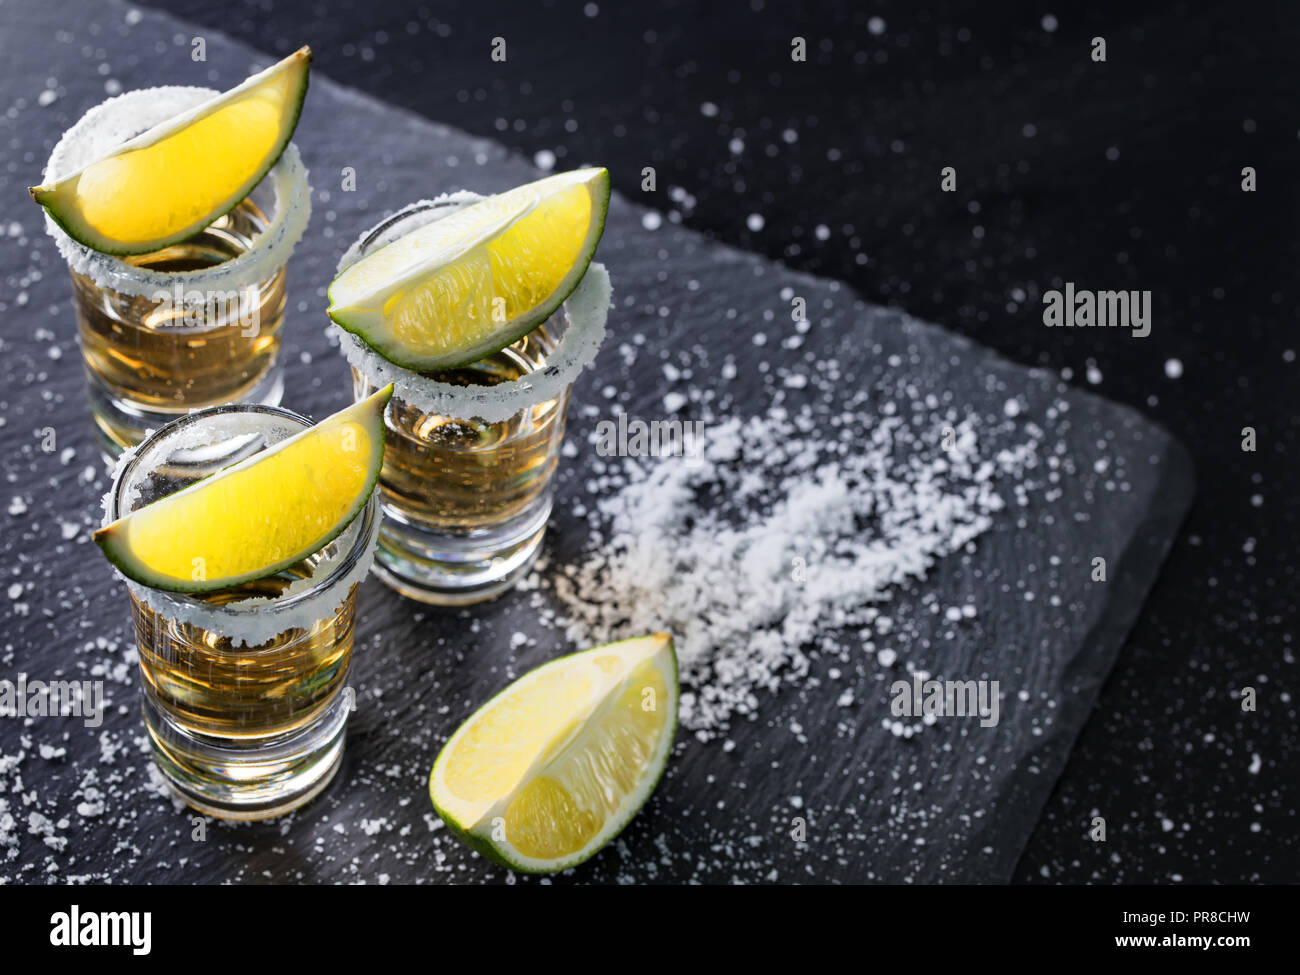 Tequila glasses with salt on the rim and lime on a black backgroundю ...